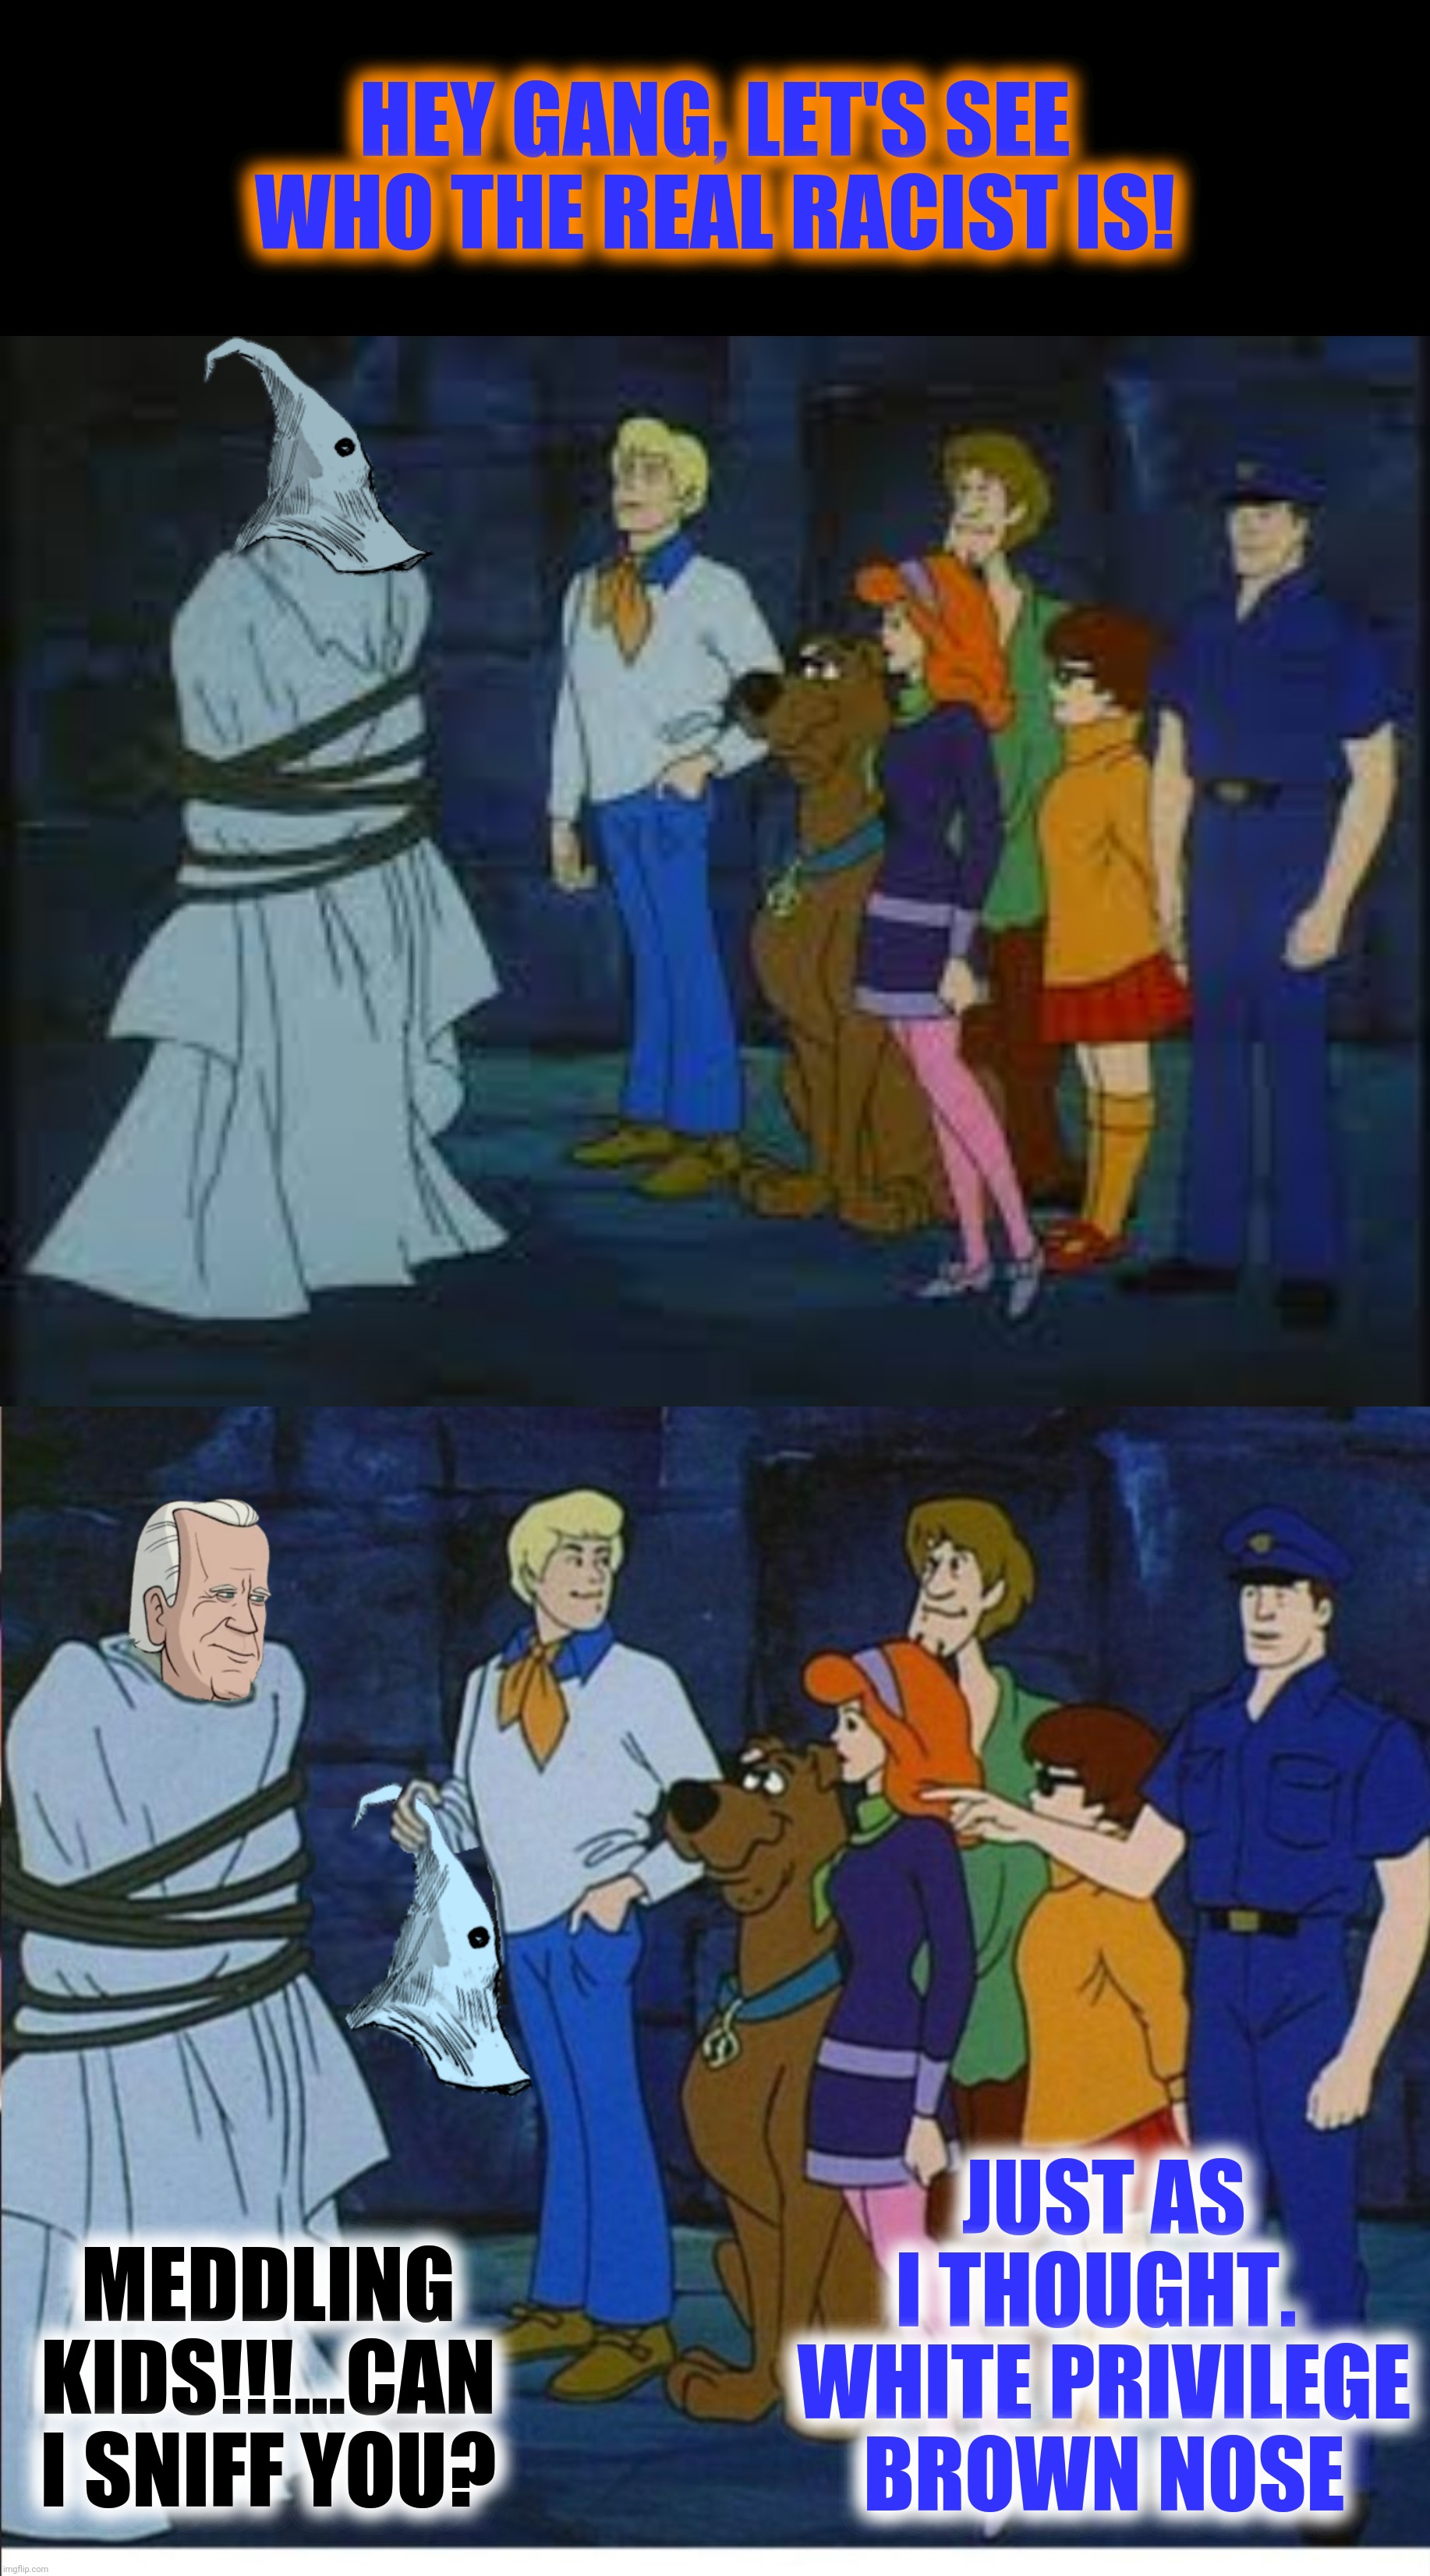 Bad Photoshop Sunday presents:  White privilege brown nose | HEY GANG, LET'S SEE WHO THE REAL RACIST IS! JUST AS I THOUGHT.  WHITE PRIVILEGE BROWN NOSE; MEDDLING KIDS!!!...CAN I SNIFF YOU? | image tagged in bad photoshop sunday,joe biden,scooby doo,meddling kids | made w/ Imgflip meme maker